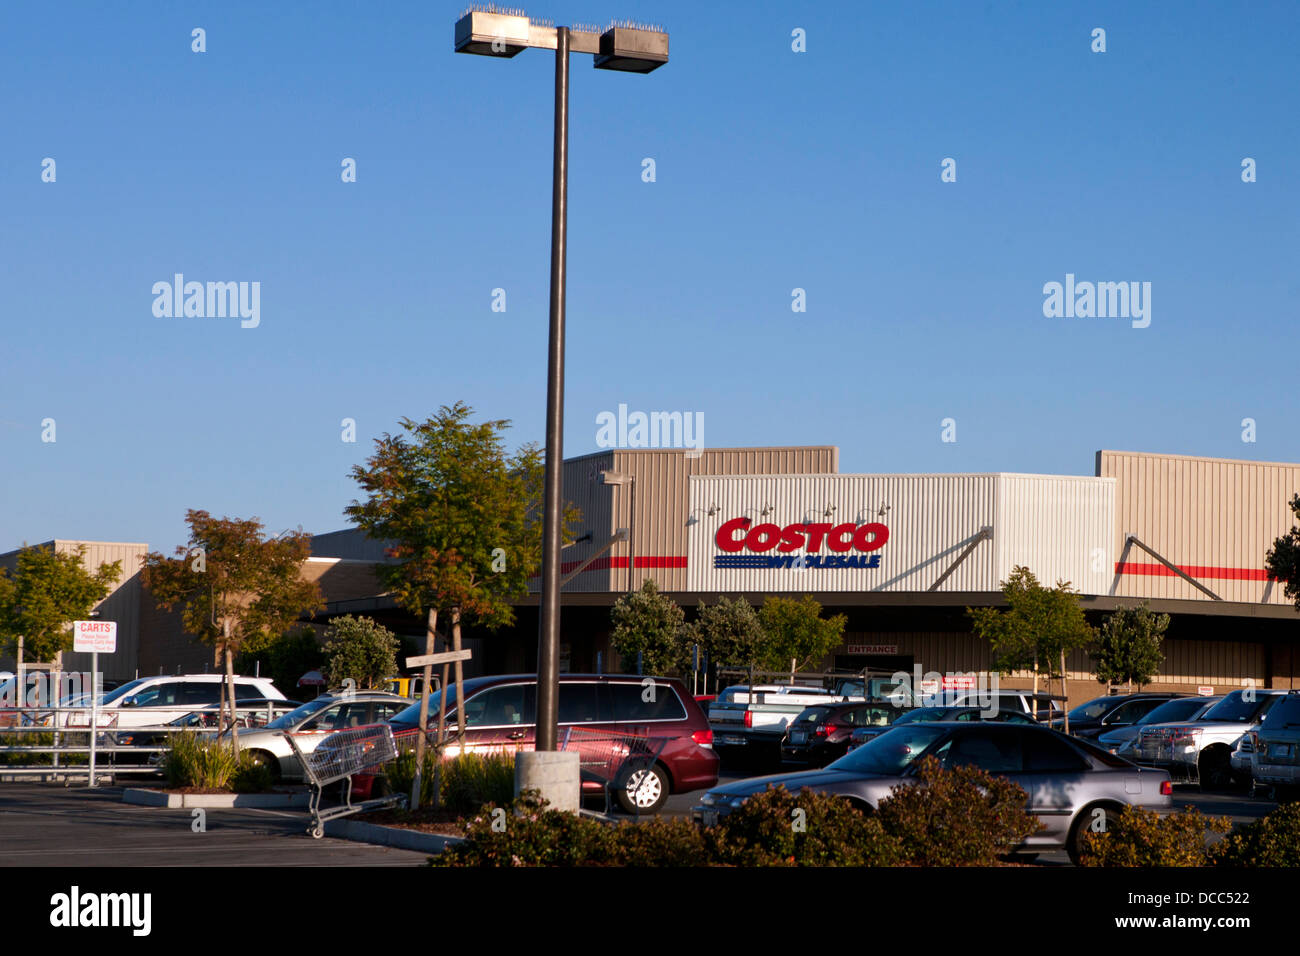 Costco Wholesale warehouse and parking lot, Redwood City, California, United States of America Stock Photo